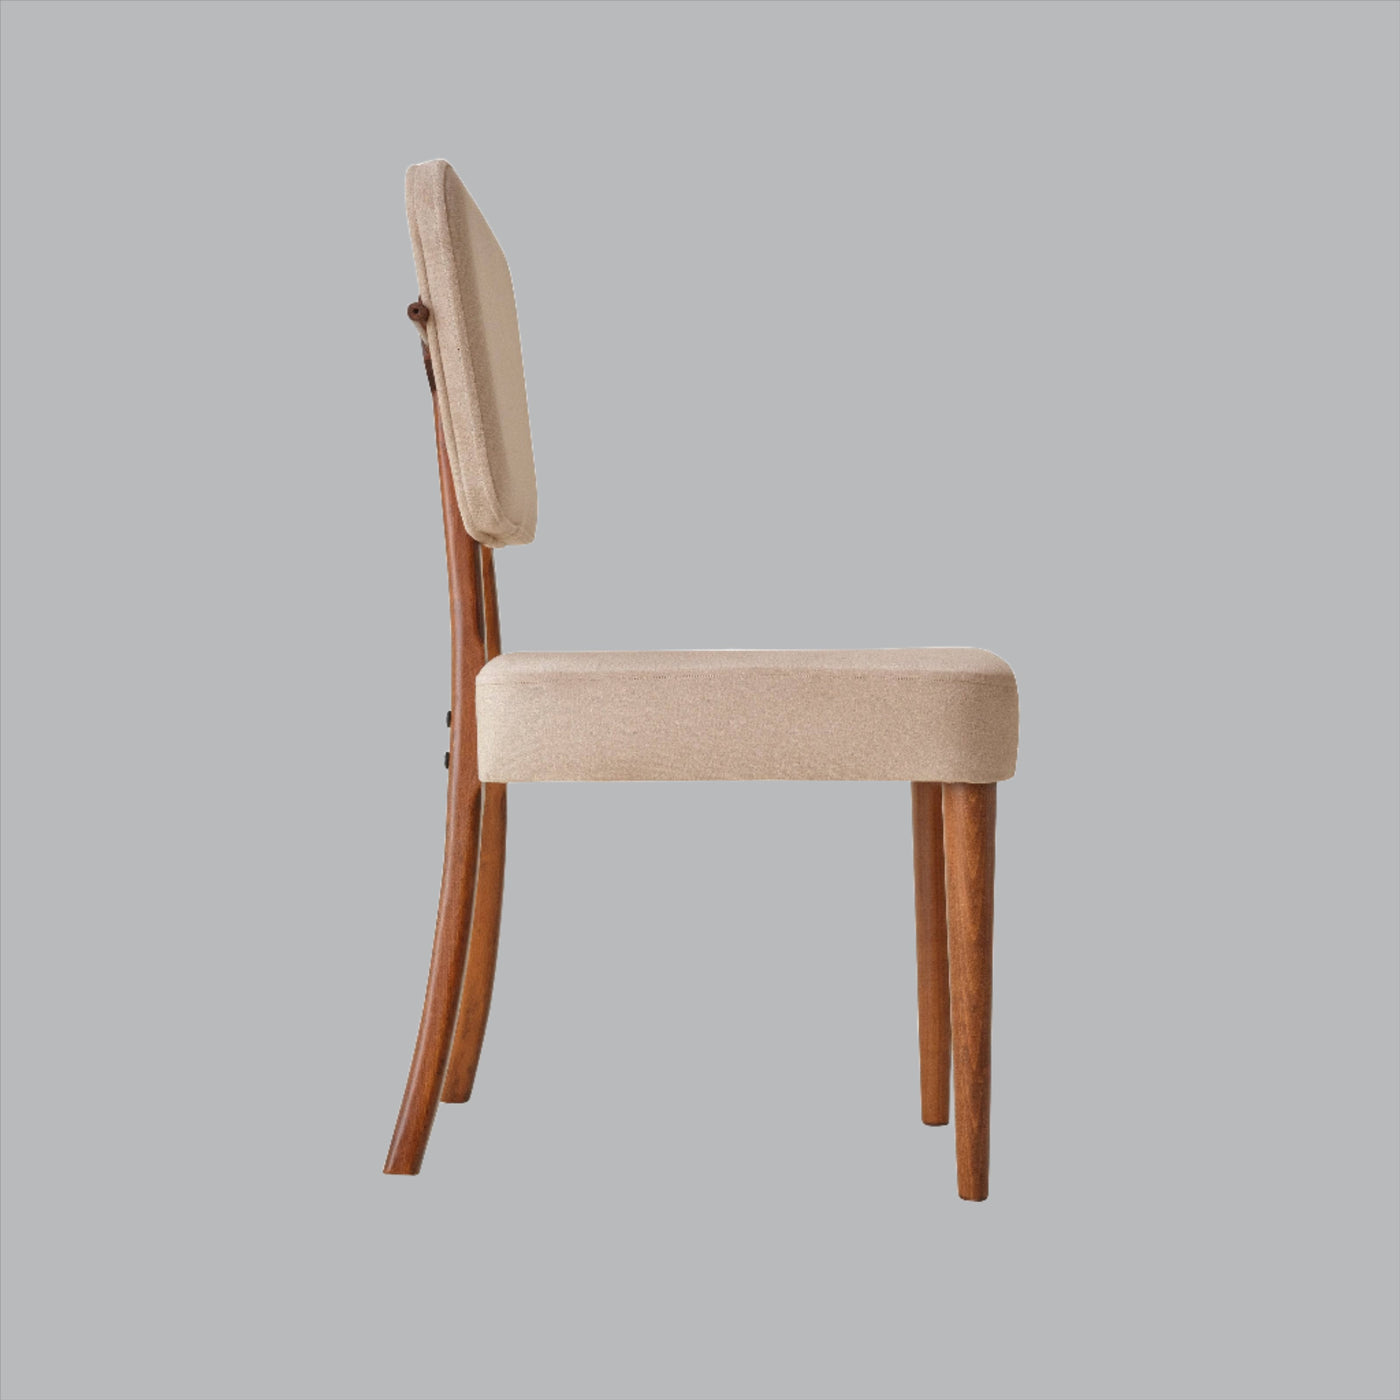 Piet Set of 4 Dining Chairs, Cream Dining Chairs & Benches sazy.com